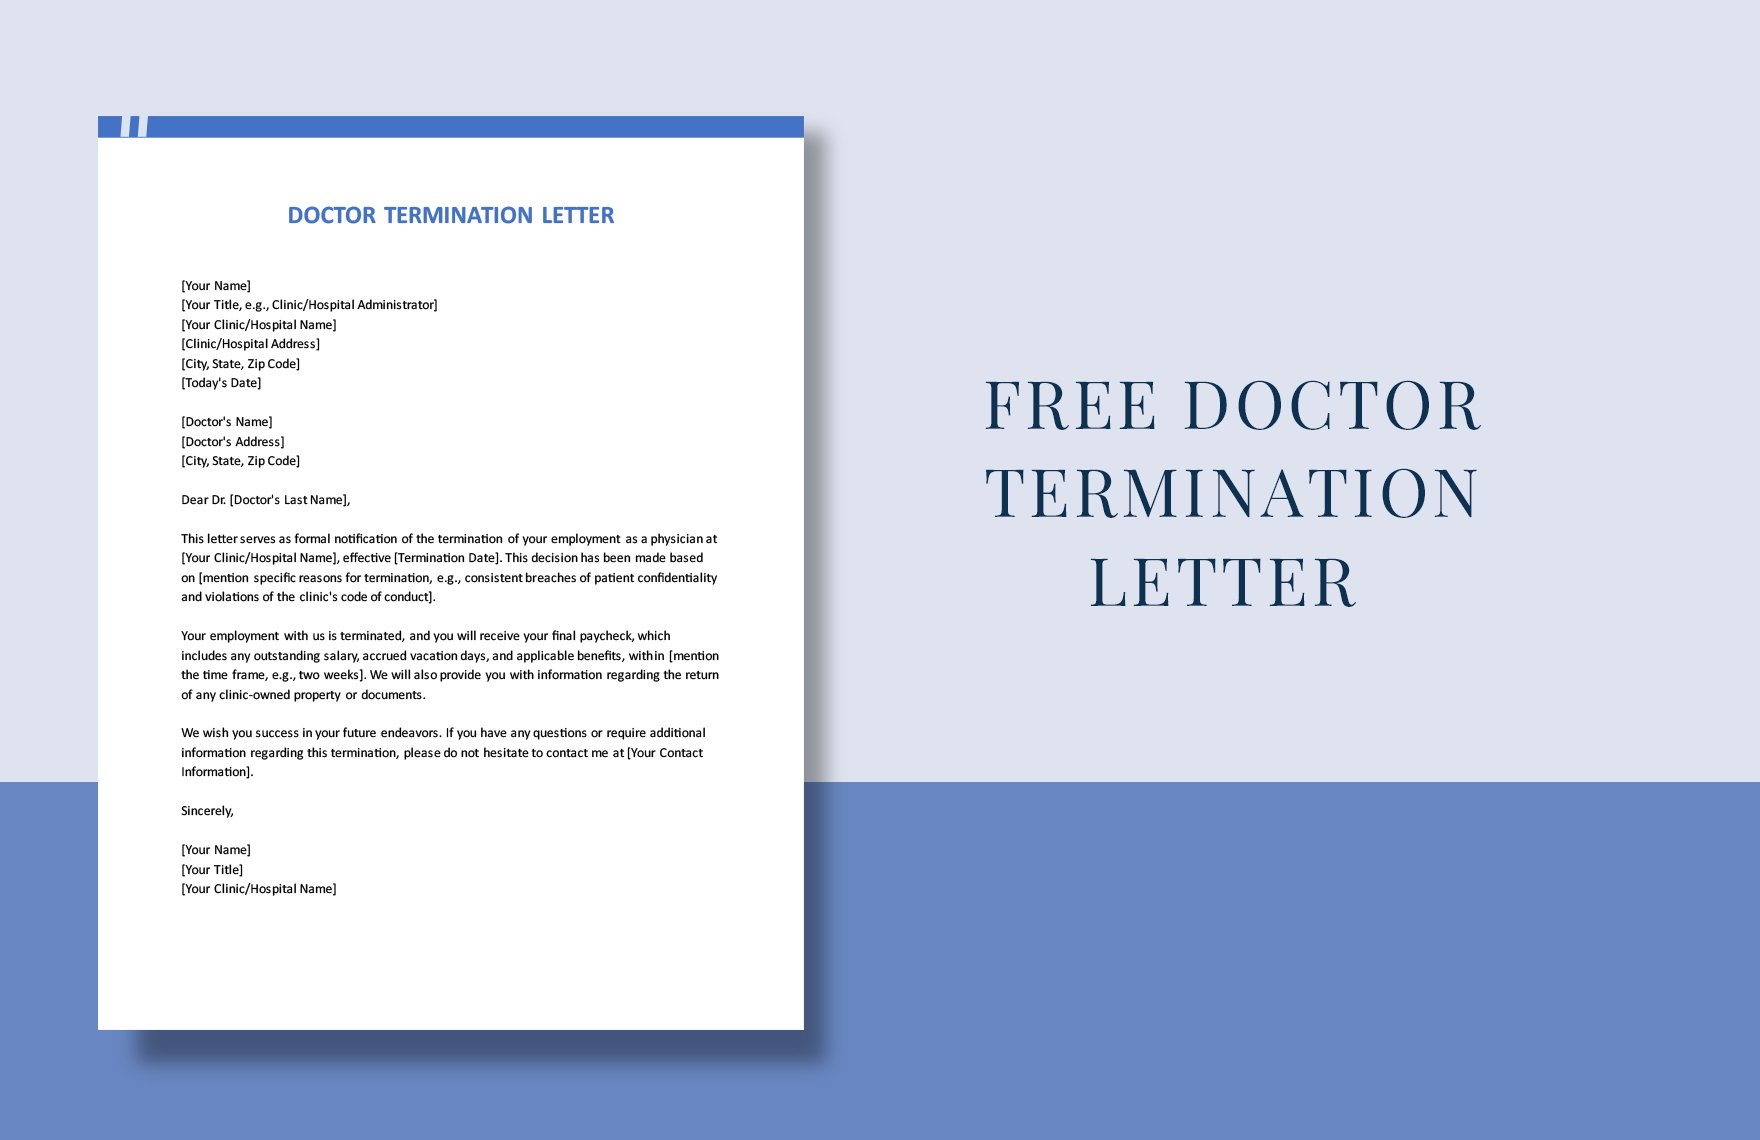 Doctor Termination Letter